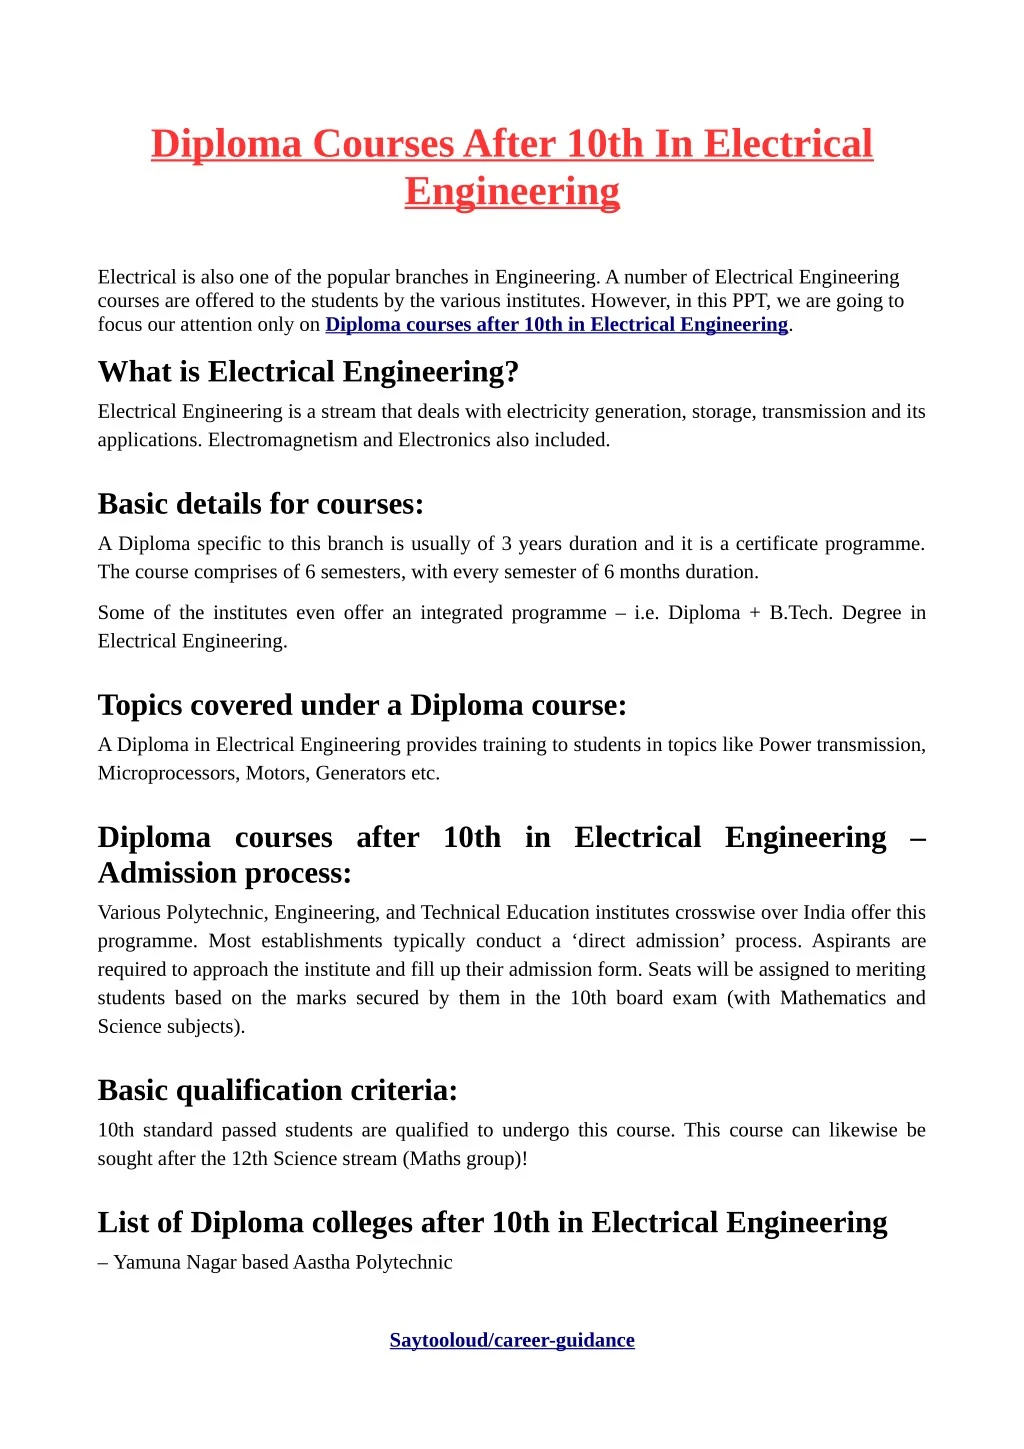 Job oriented courses after diploma in electrical engineering